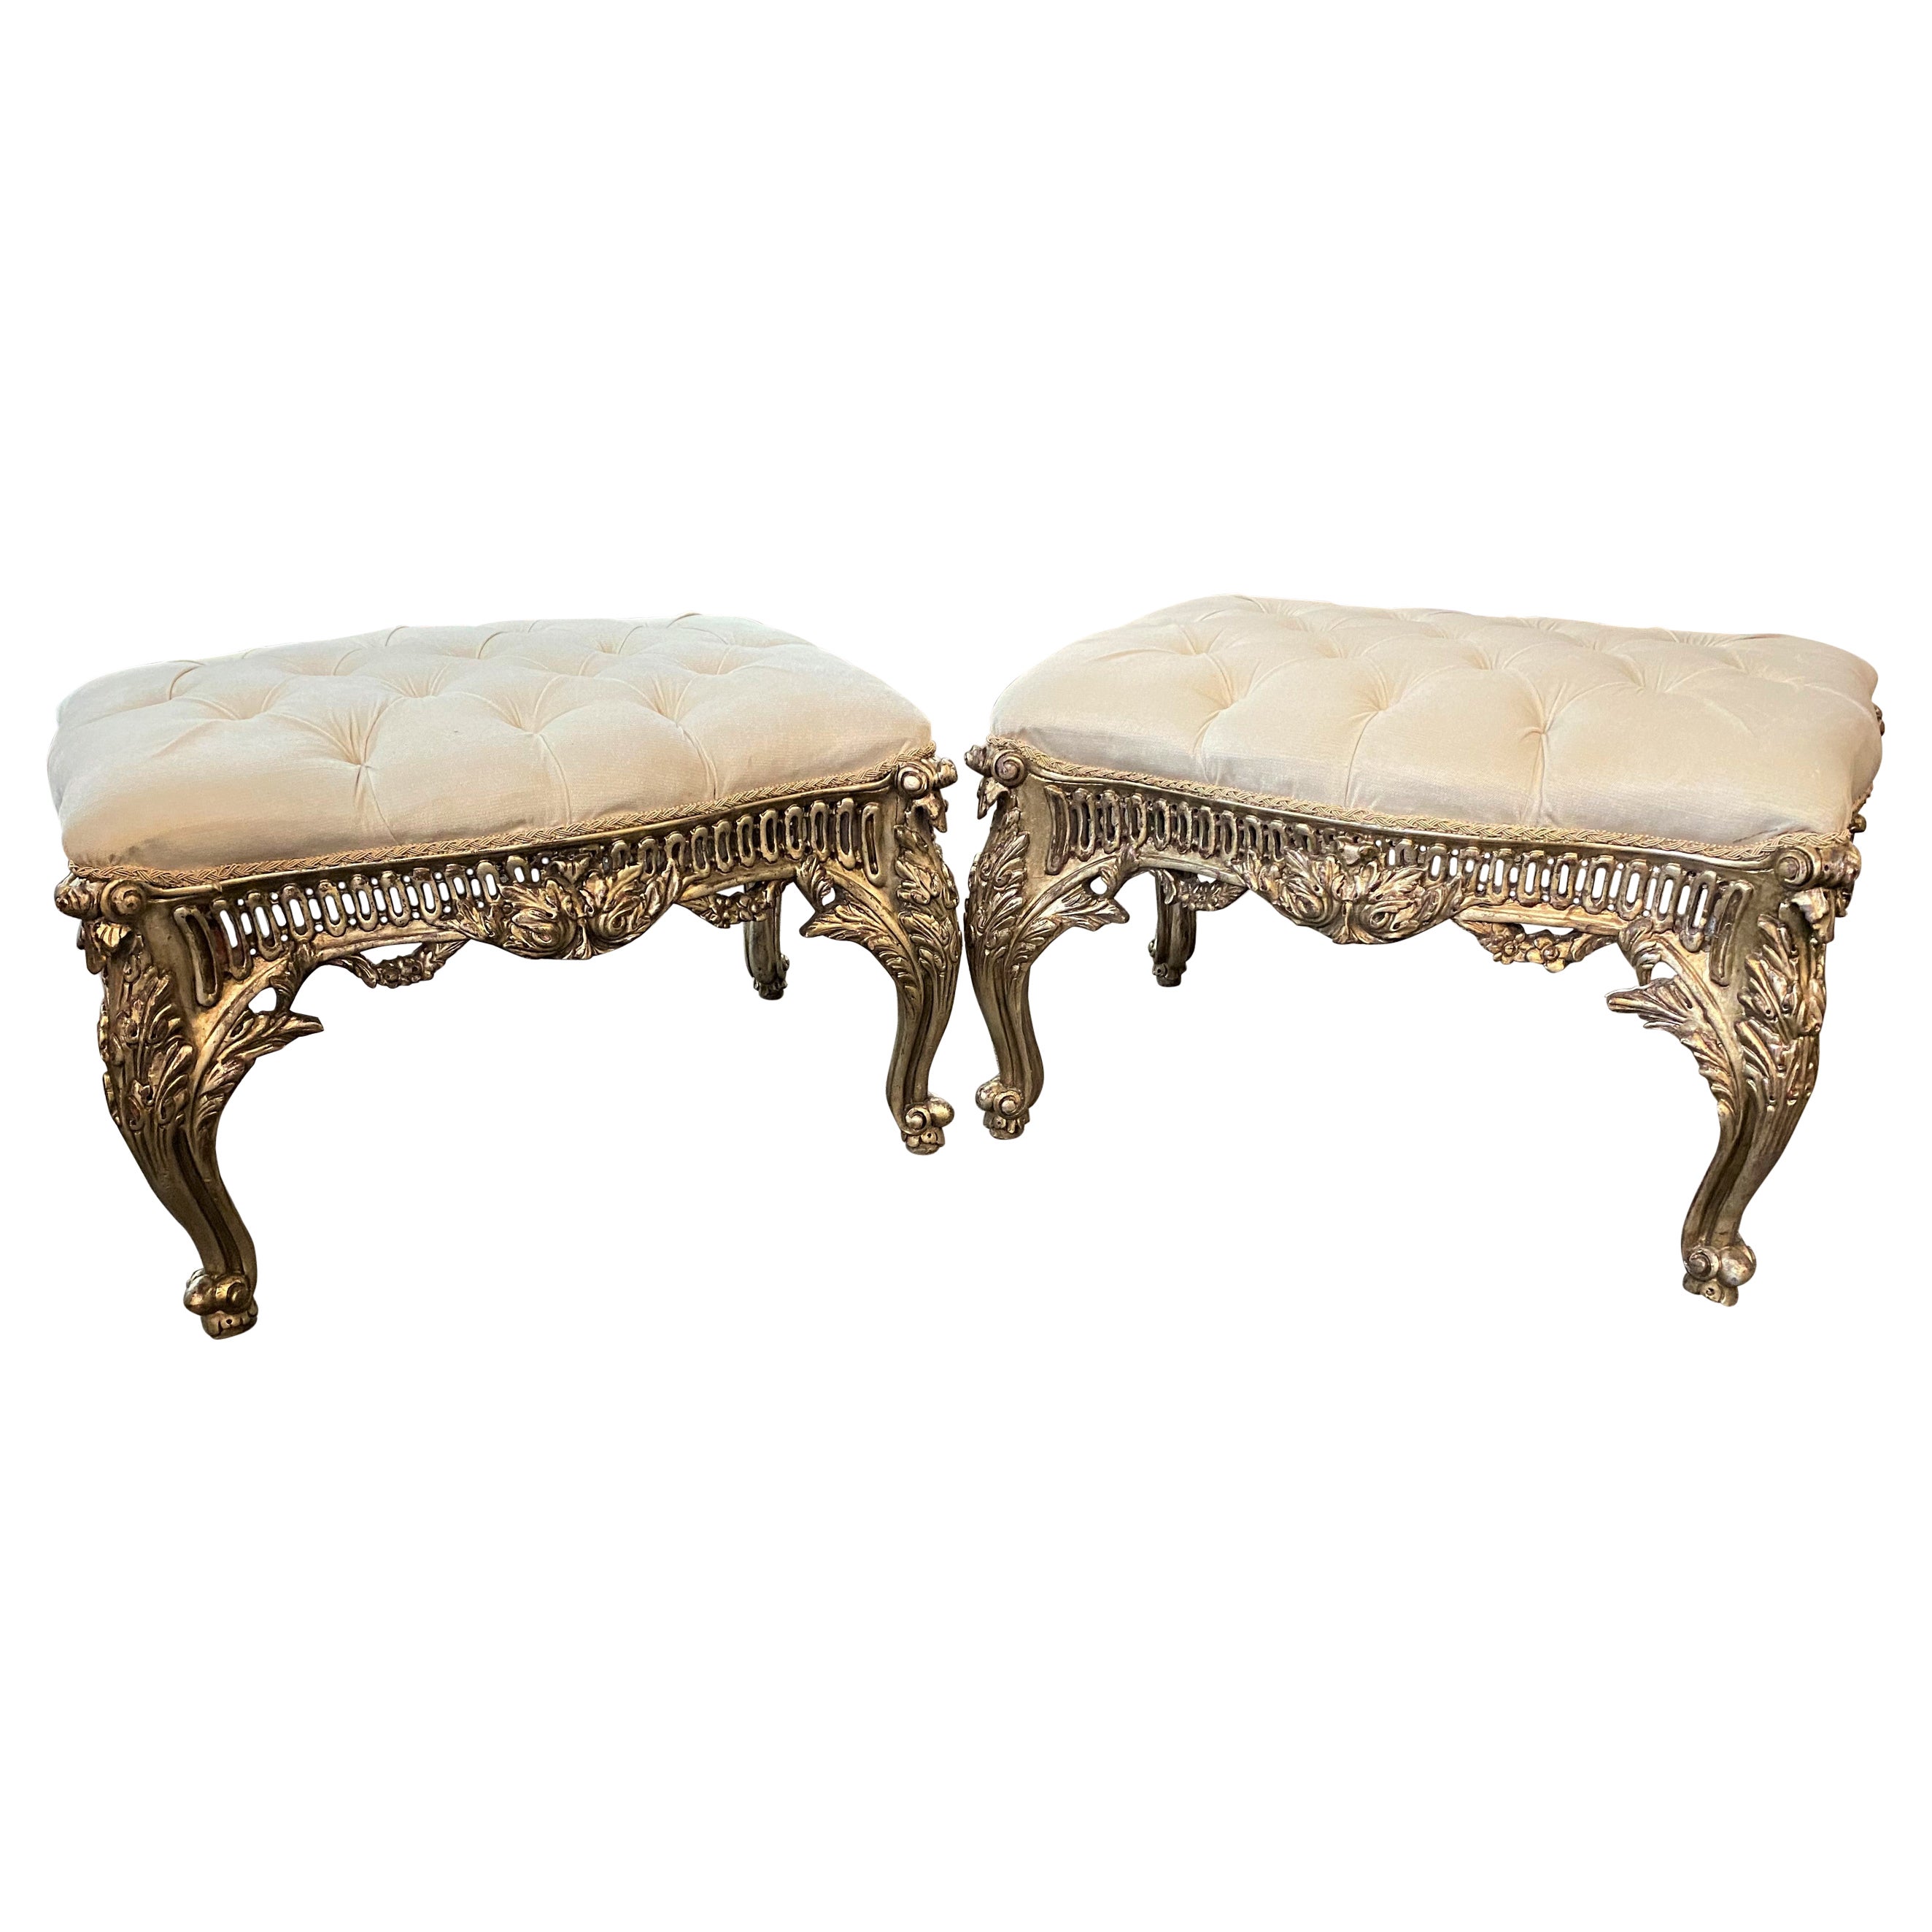 Pair of Baroque or Rococo Style Pierce Carved Silvered Ottomans For Sale